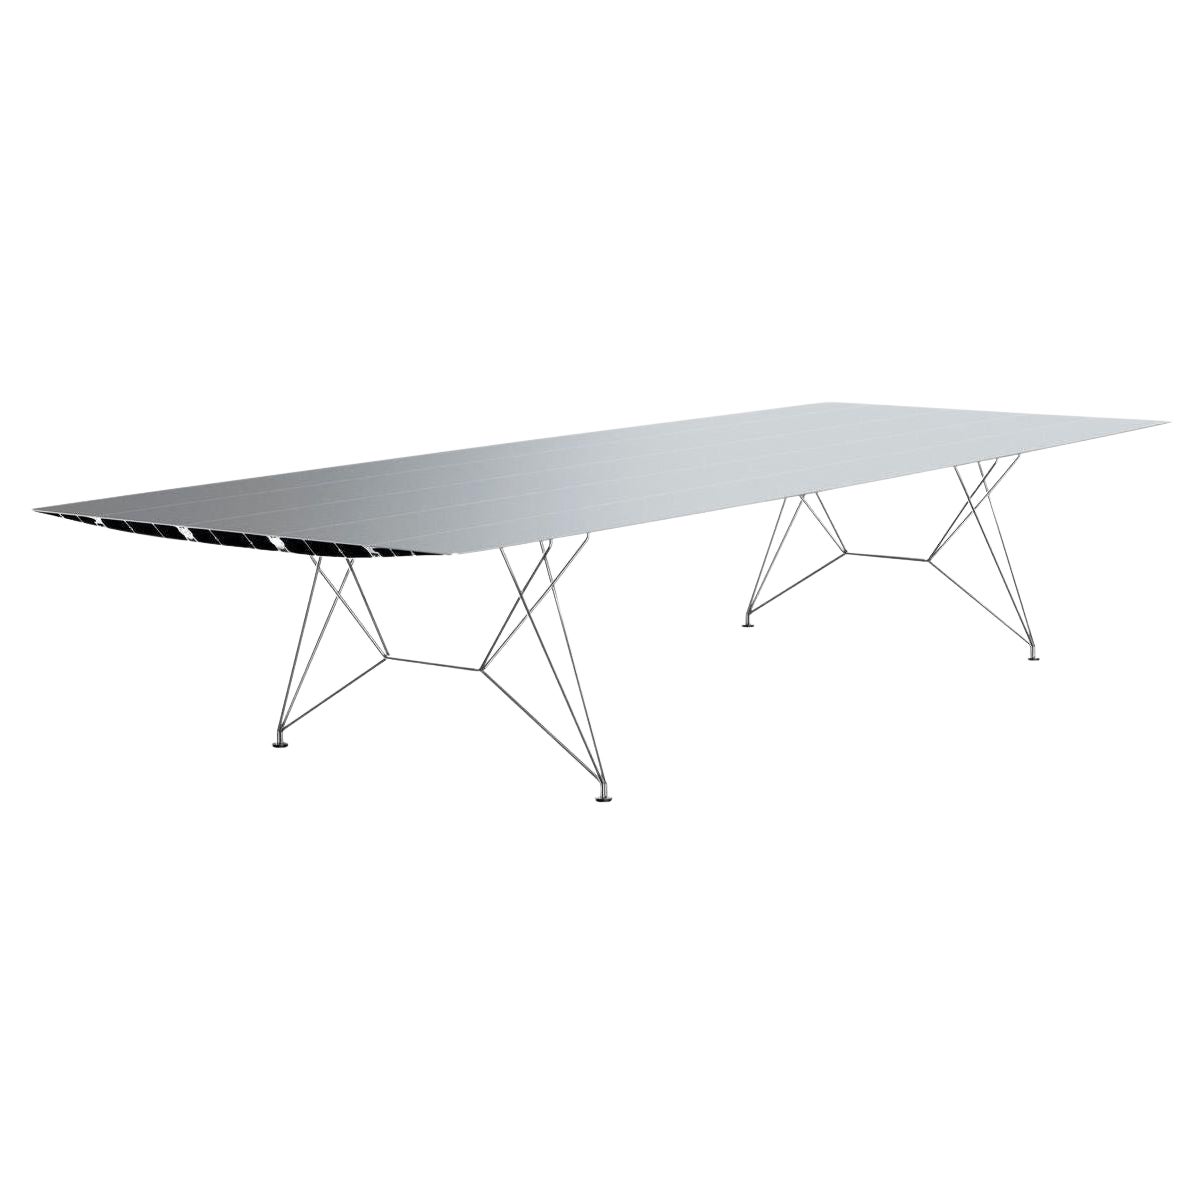 Big Stainless Steel Table B by Konstantin Grcic For Sale